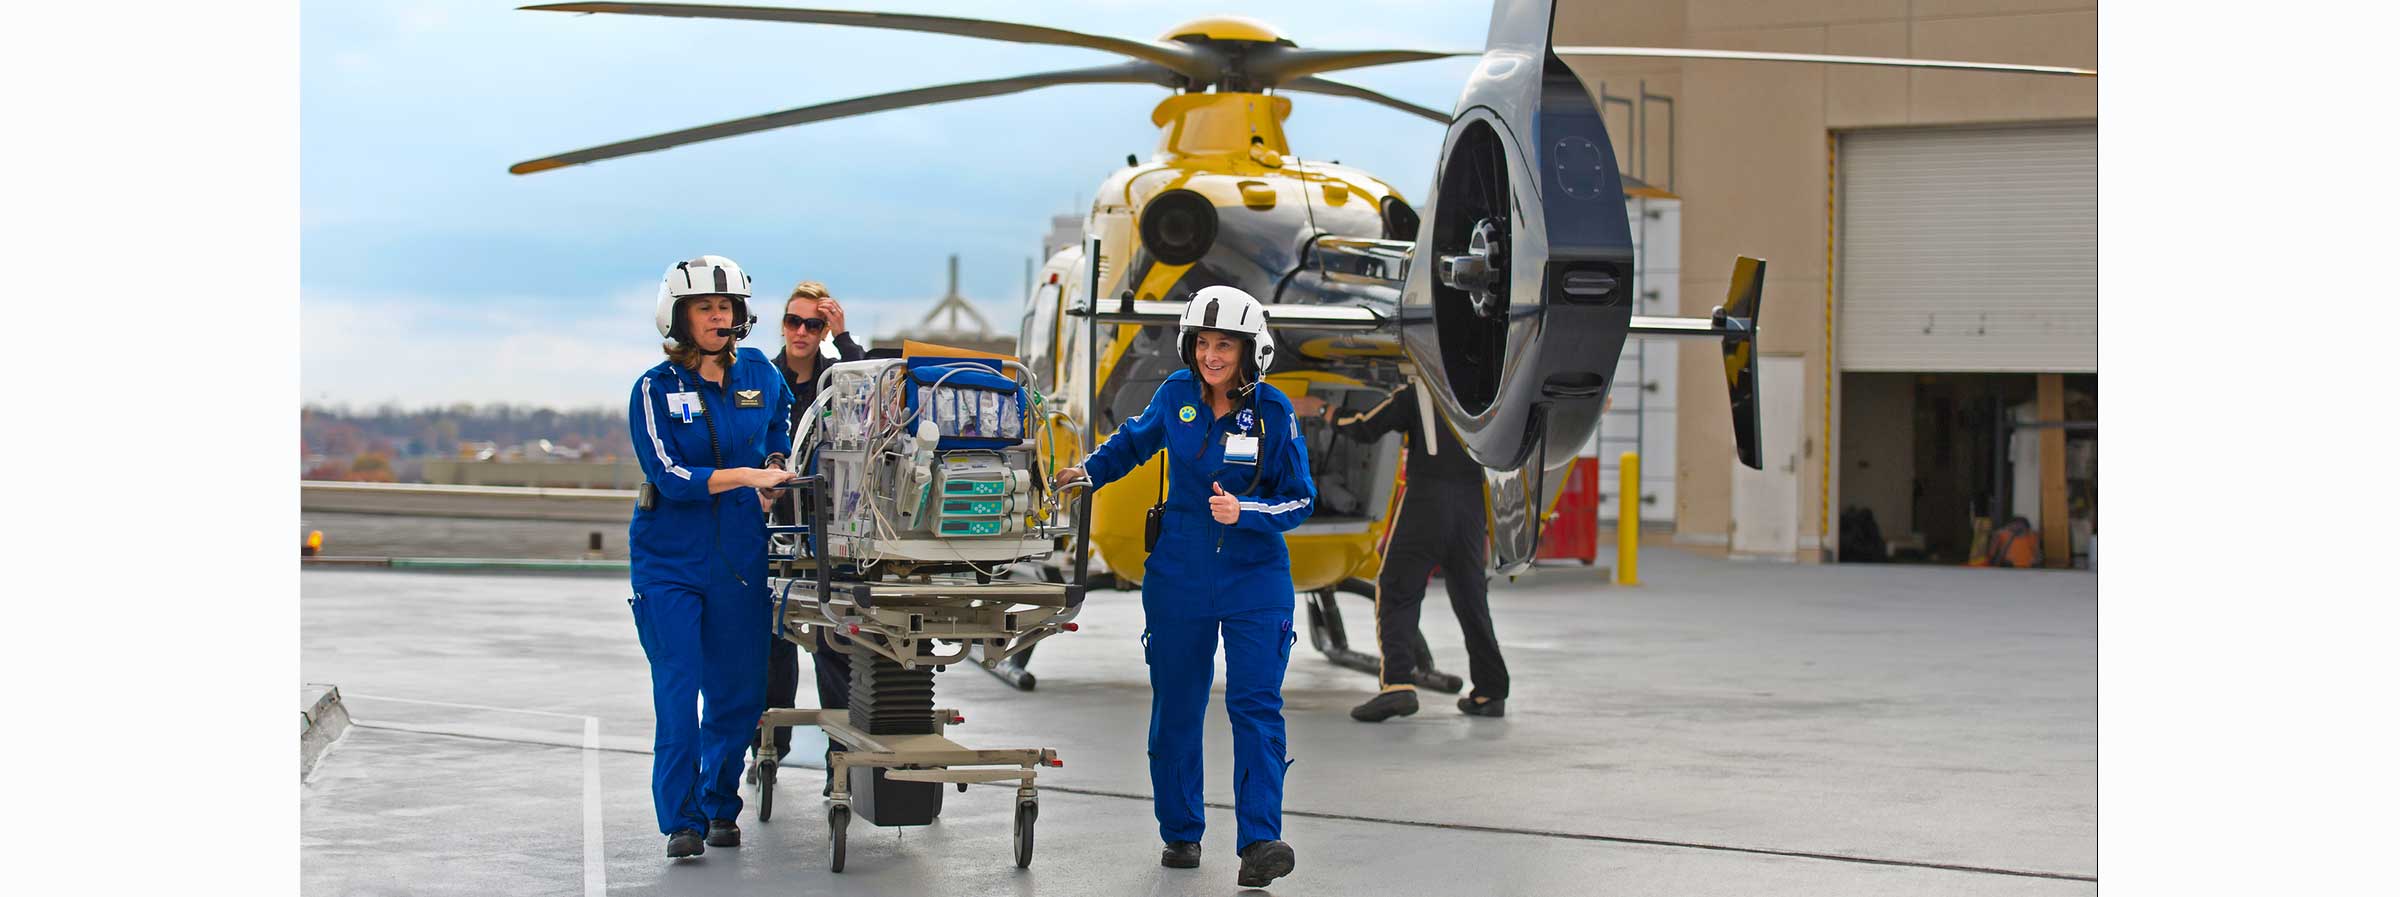 3 ladies and a helicopter on a patient transport